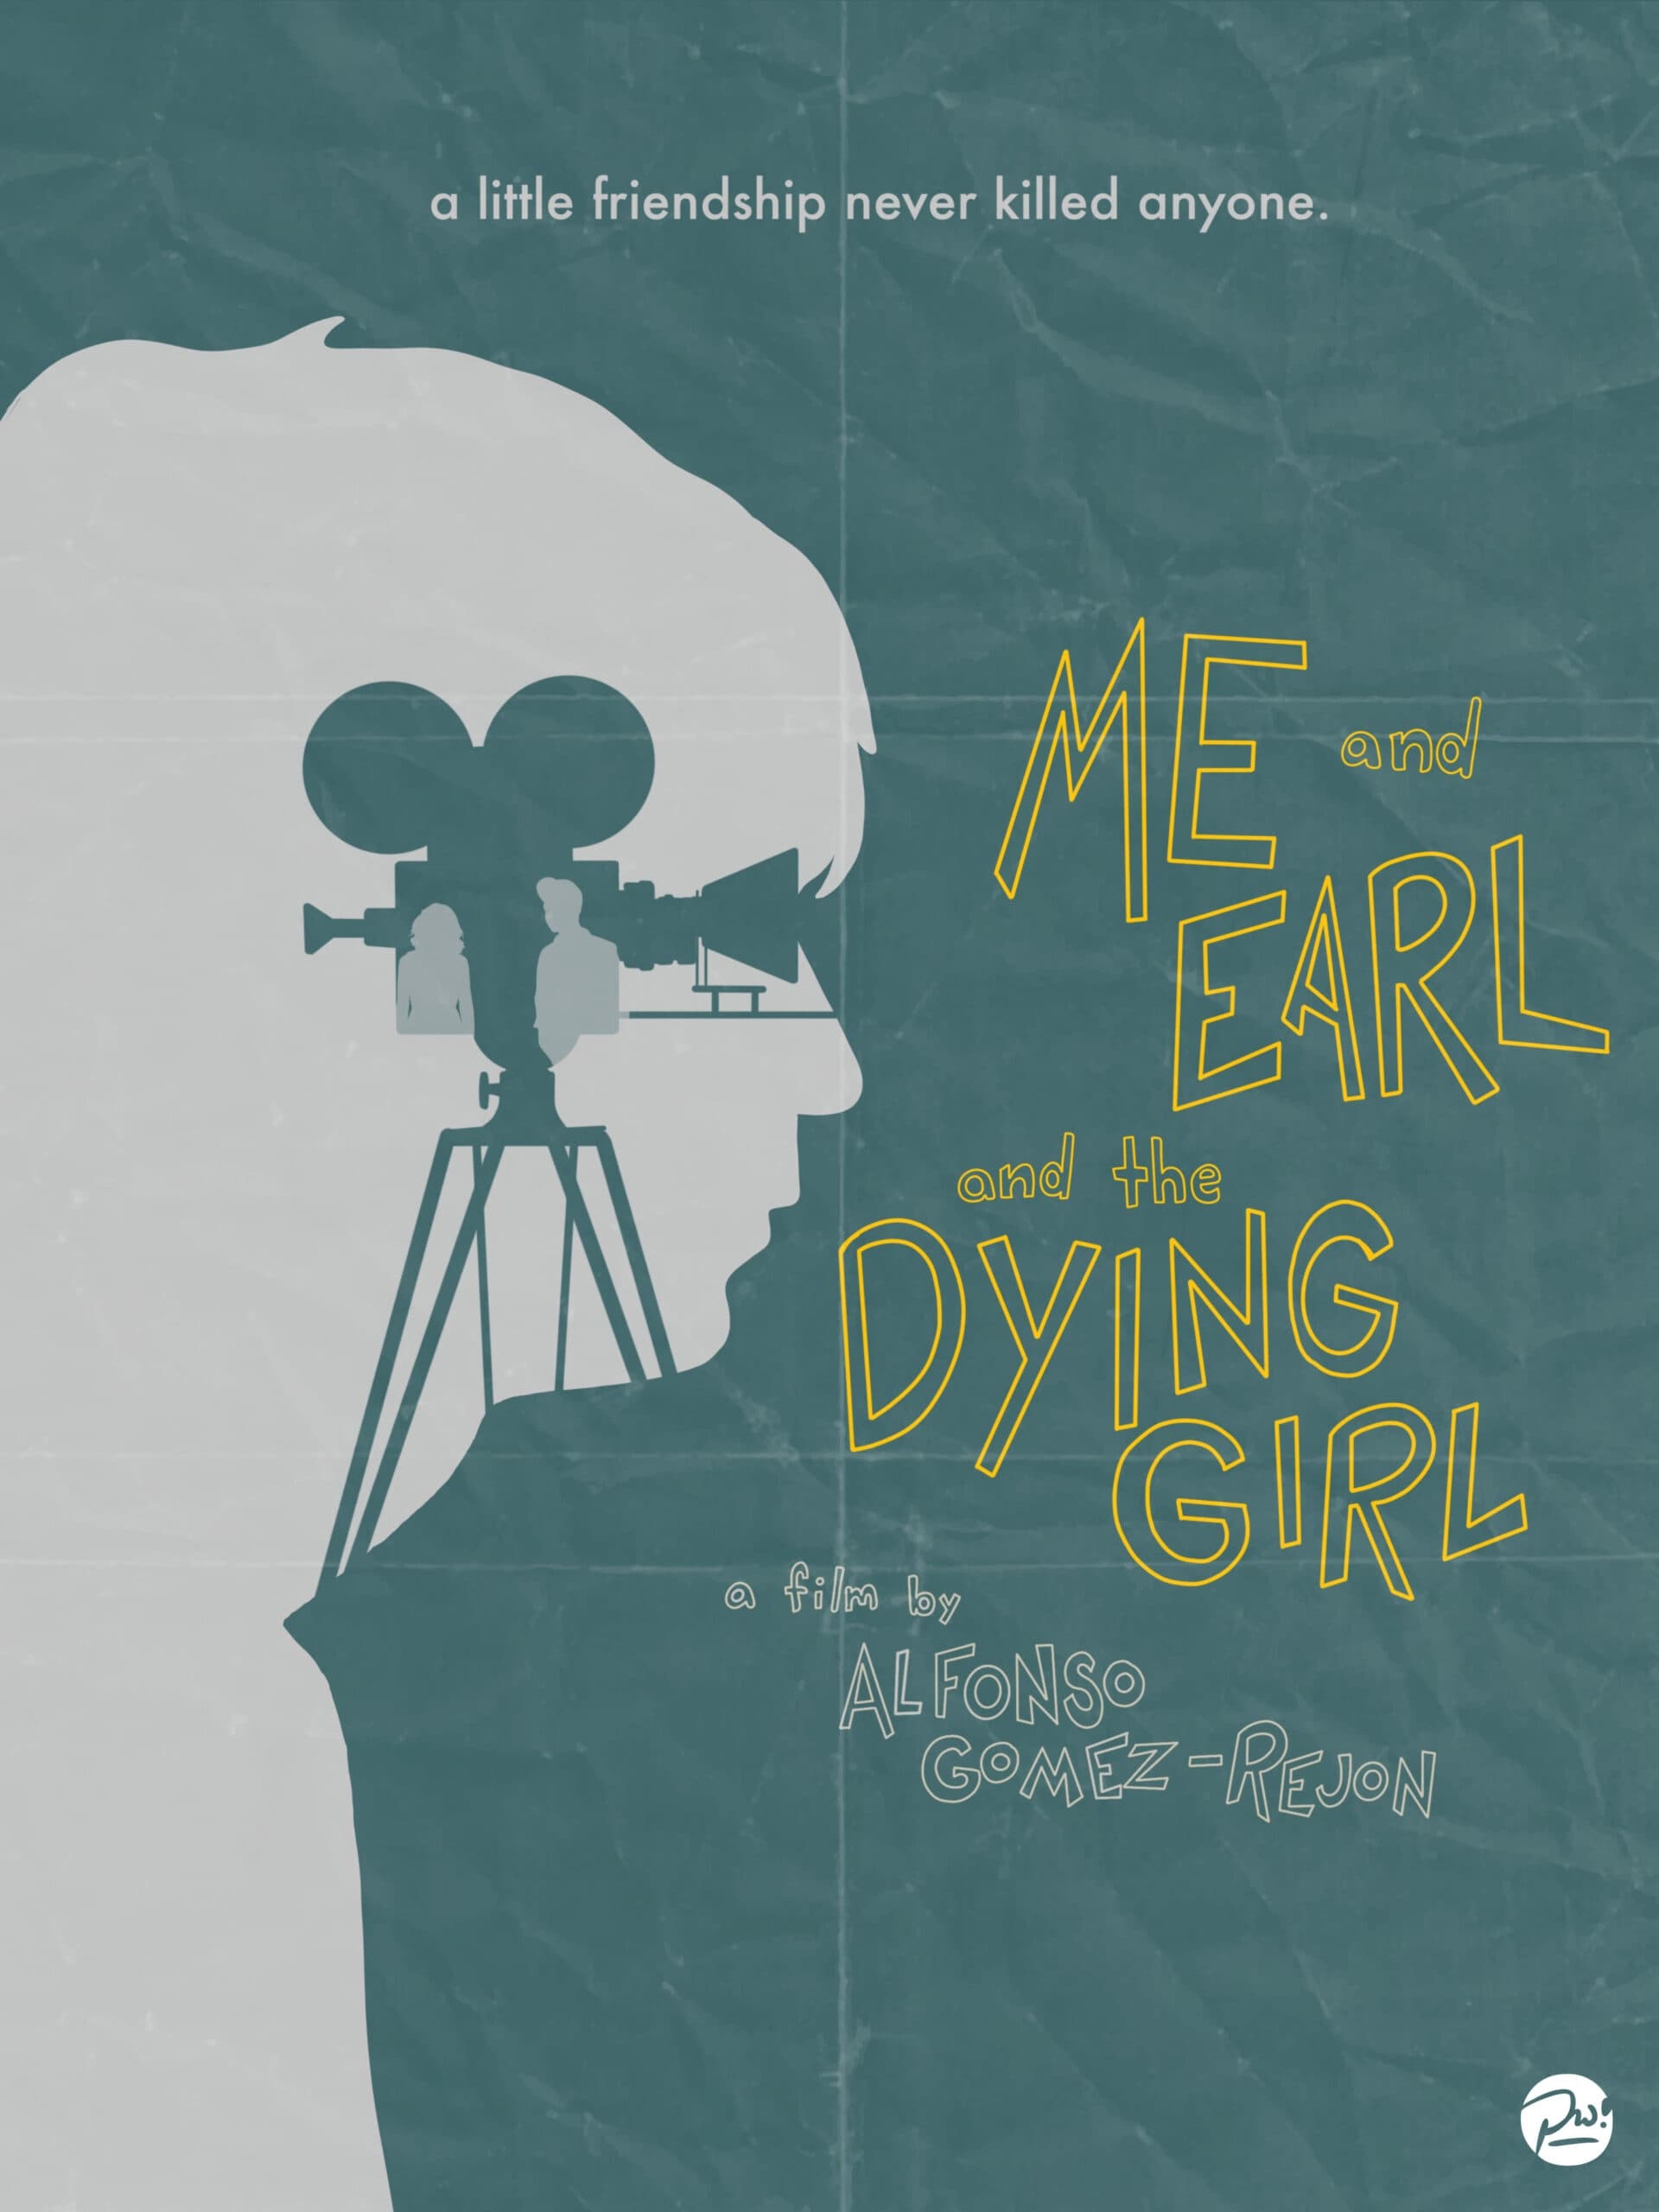 Me and Earl and the Dying Girl POSTER